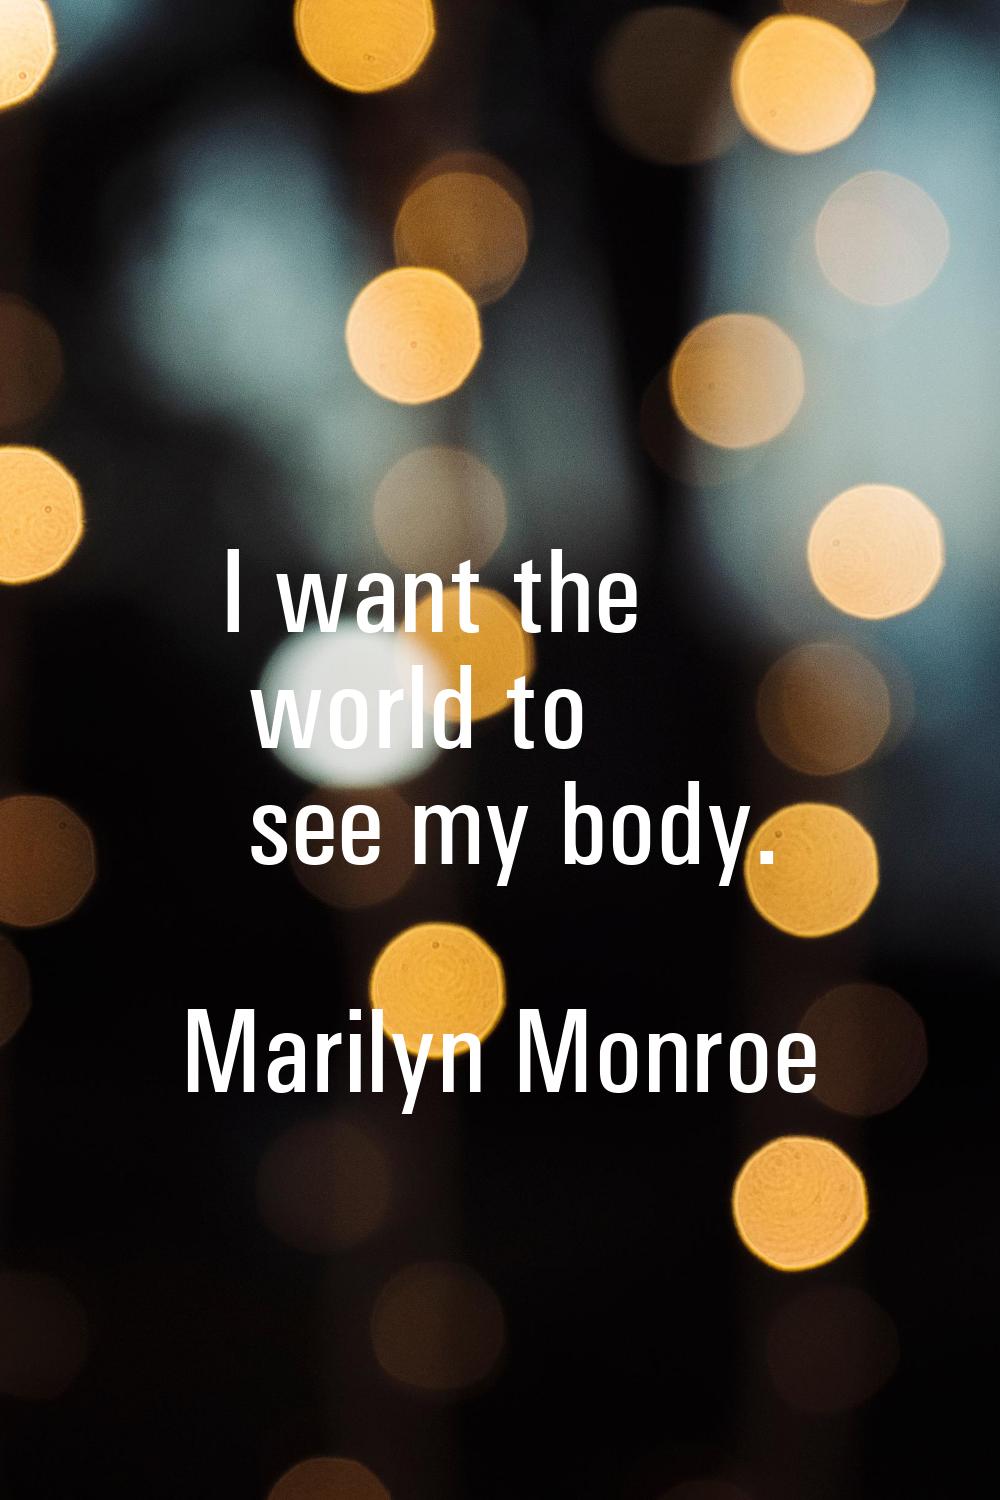 I want the world to see my body.